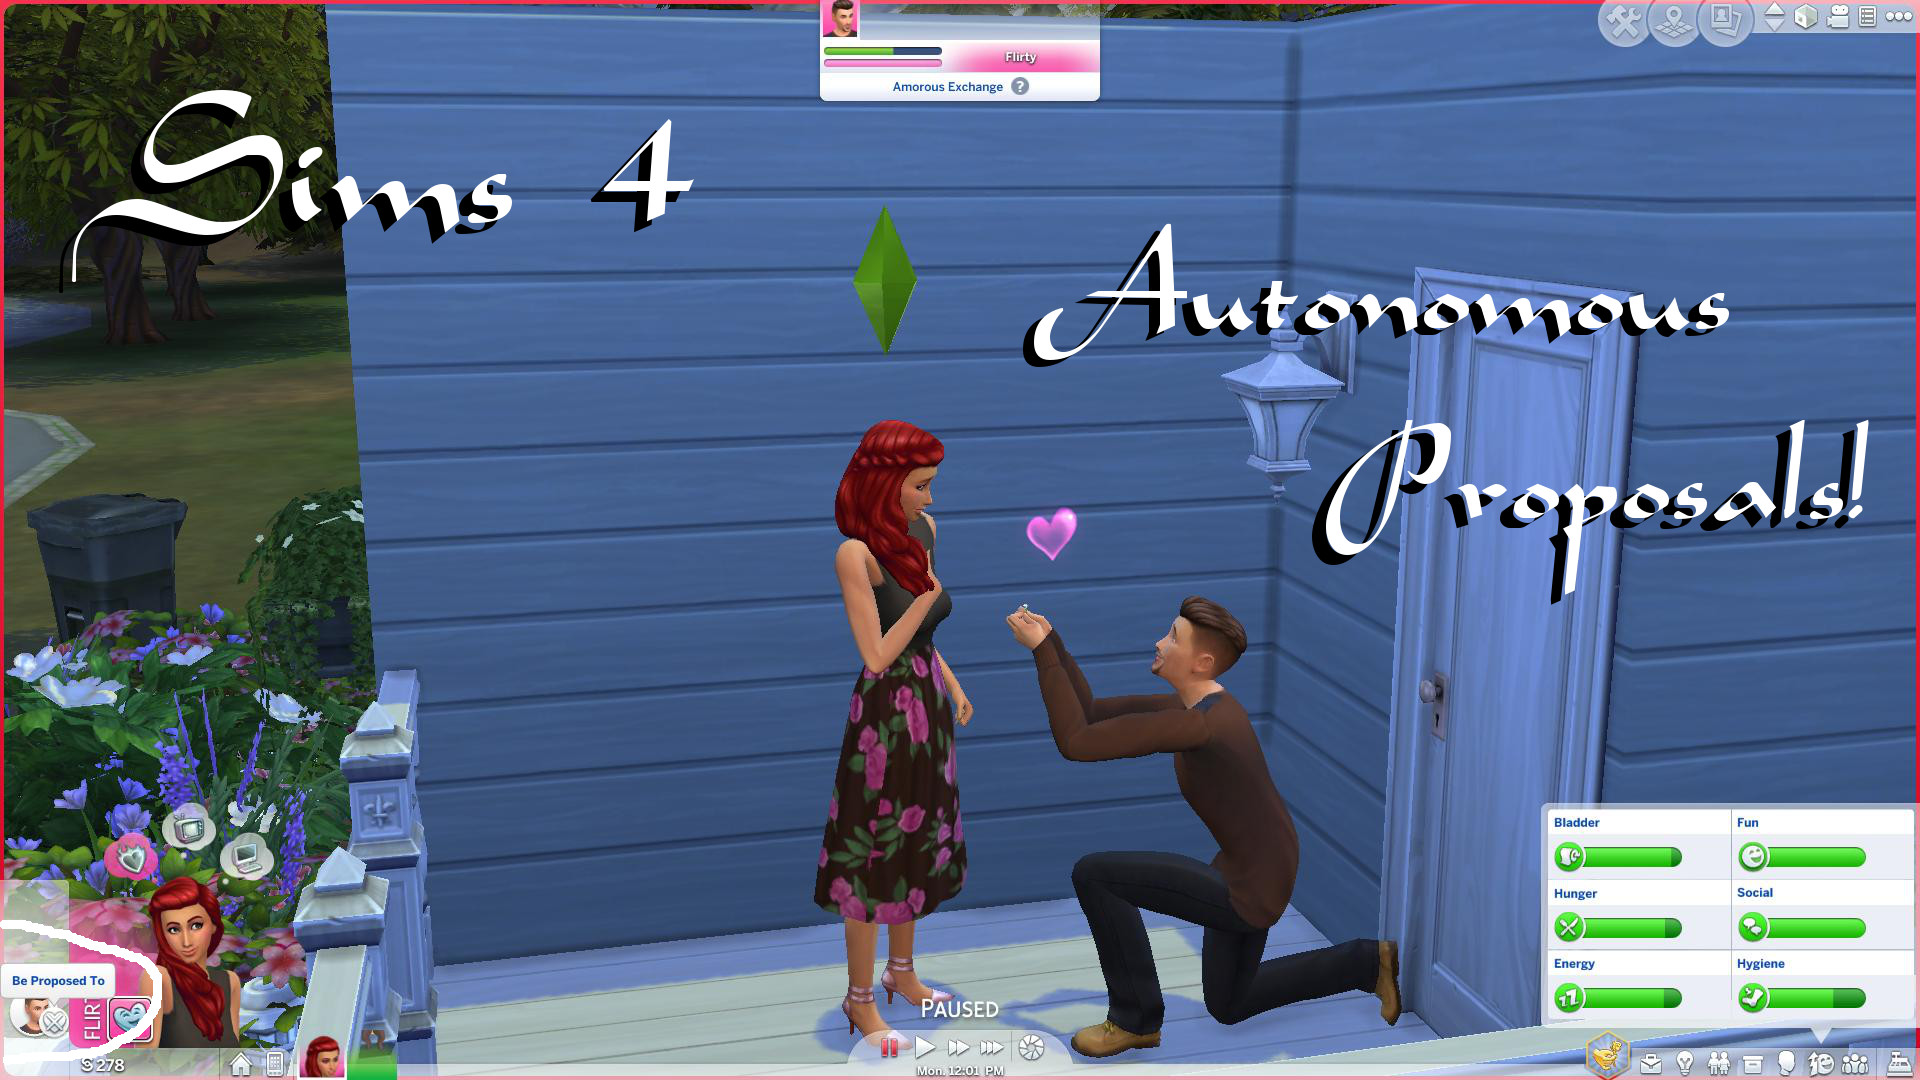 The sims 4 relationship mod